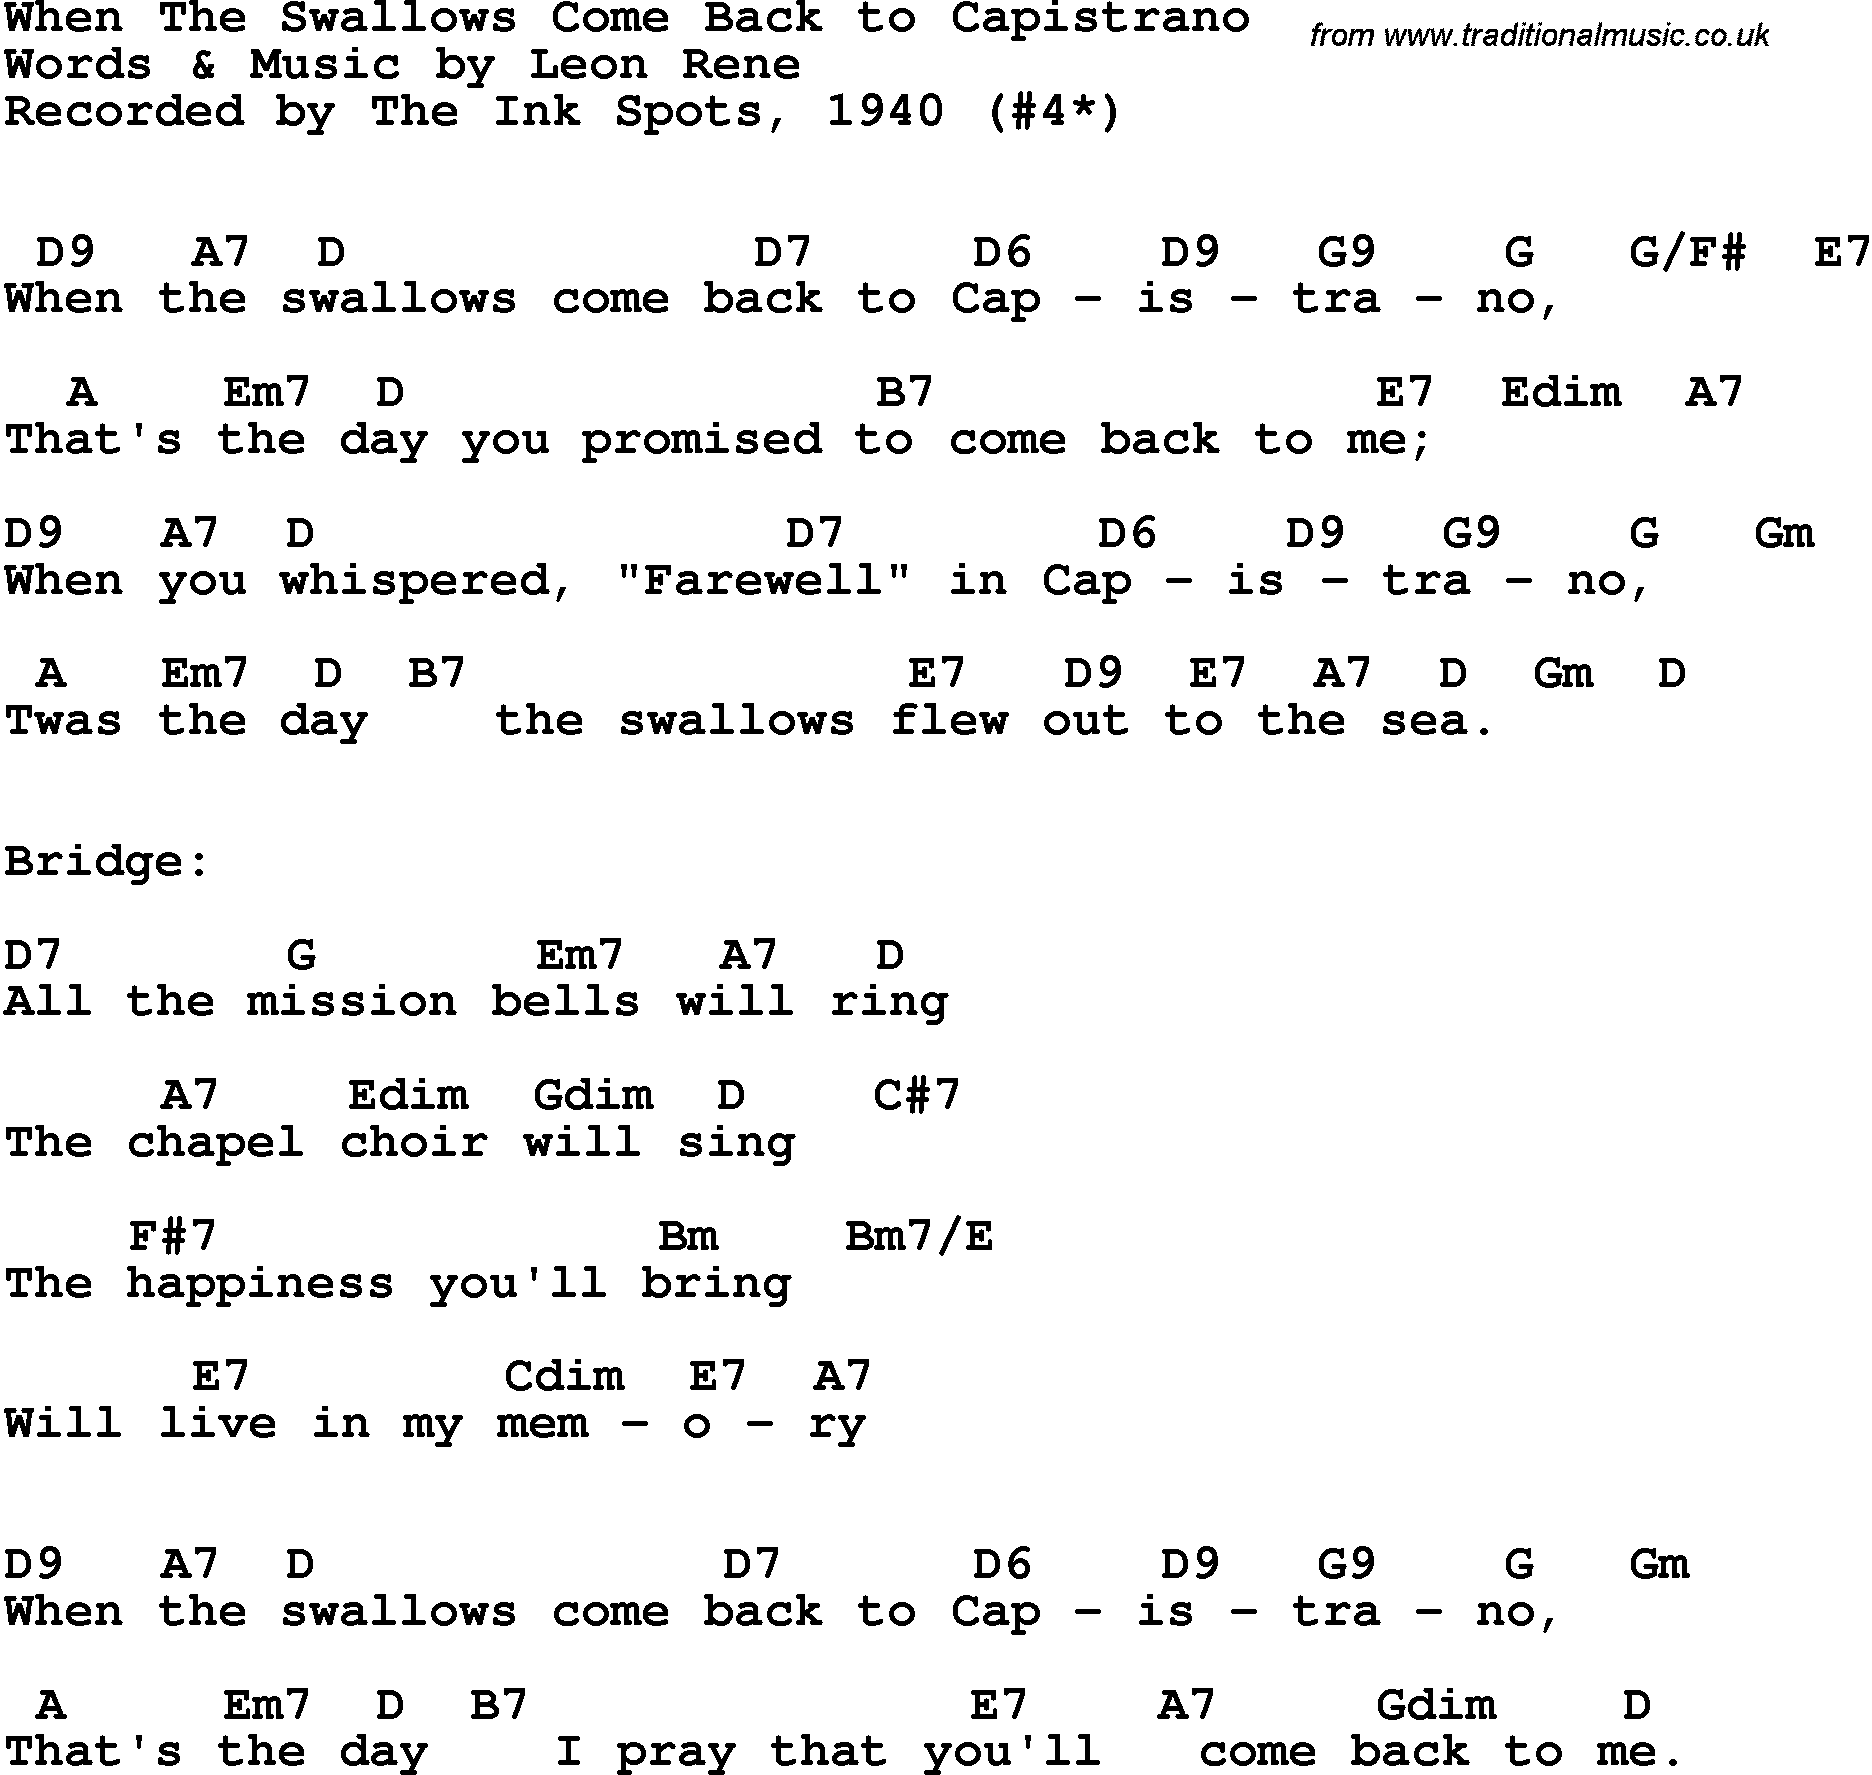 Song Lyrics with guitar chords for When The Swallows Come Back To Capistrano - 1940